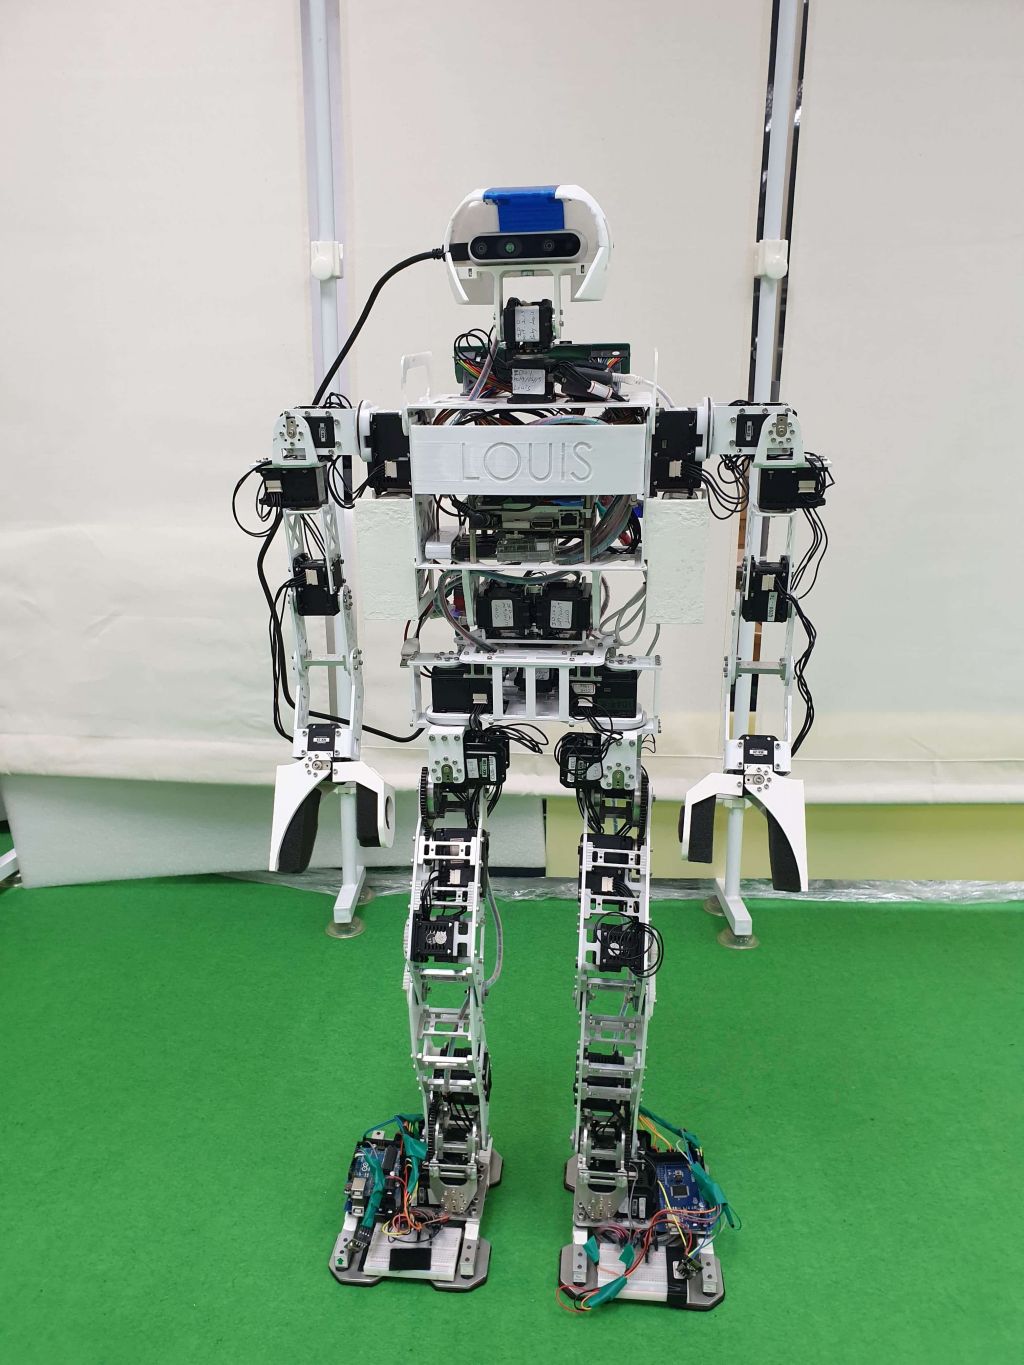 Design and Implementation of Toddler-sized Humanoid Robot with Learning Capability